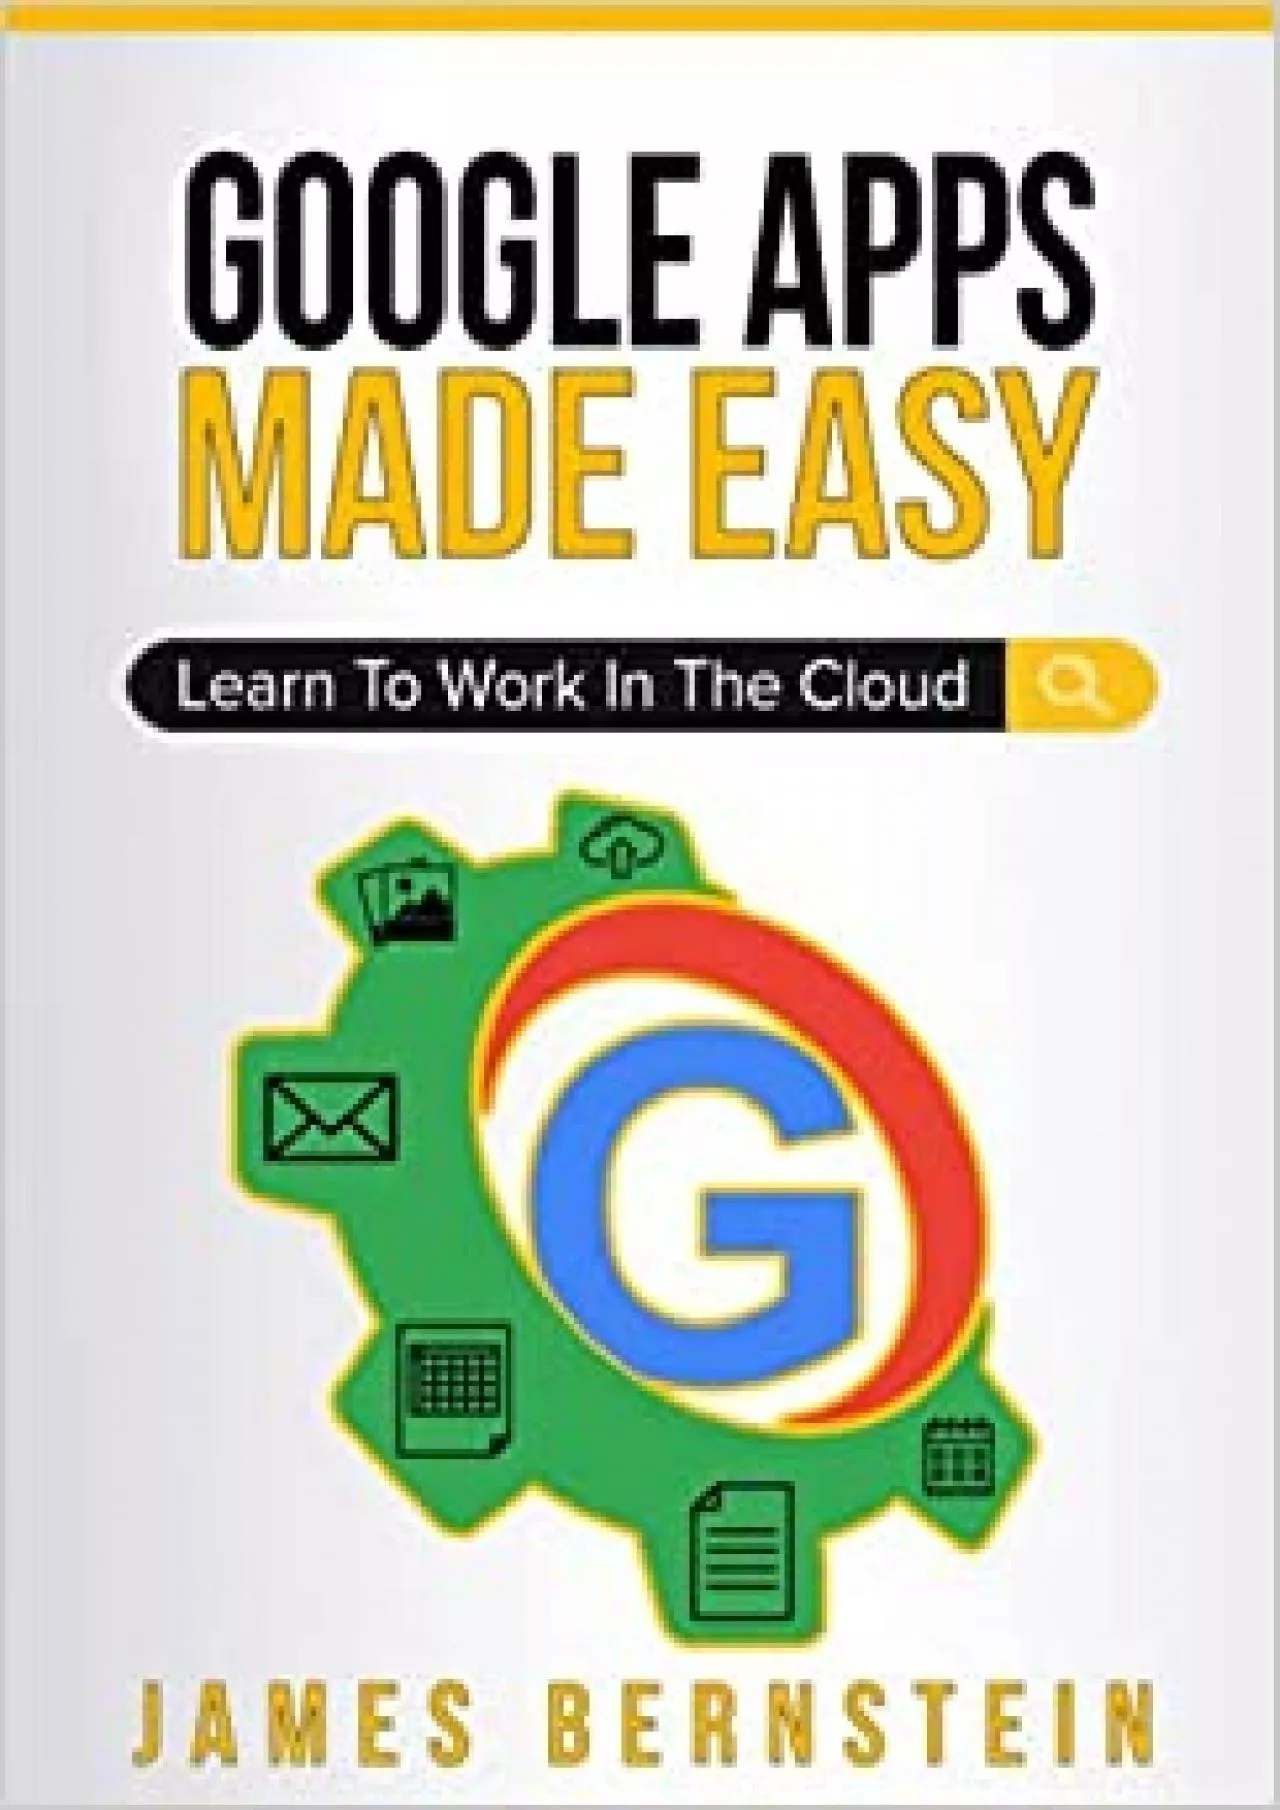 Google Apps Made Easy: Learn to work in the cloud (Computers Made Easy Book 7) (Productivity